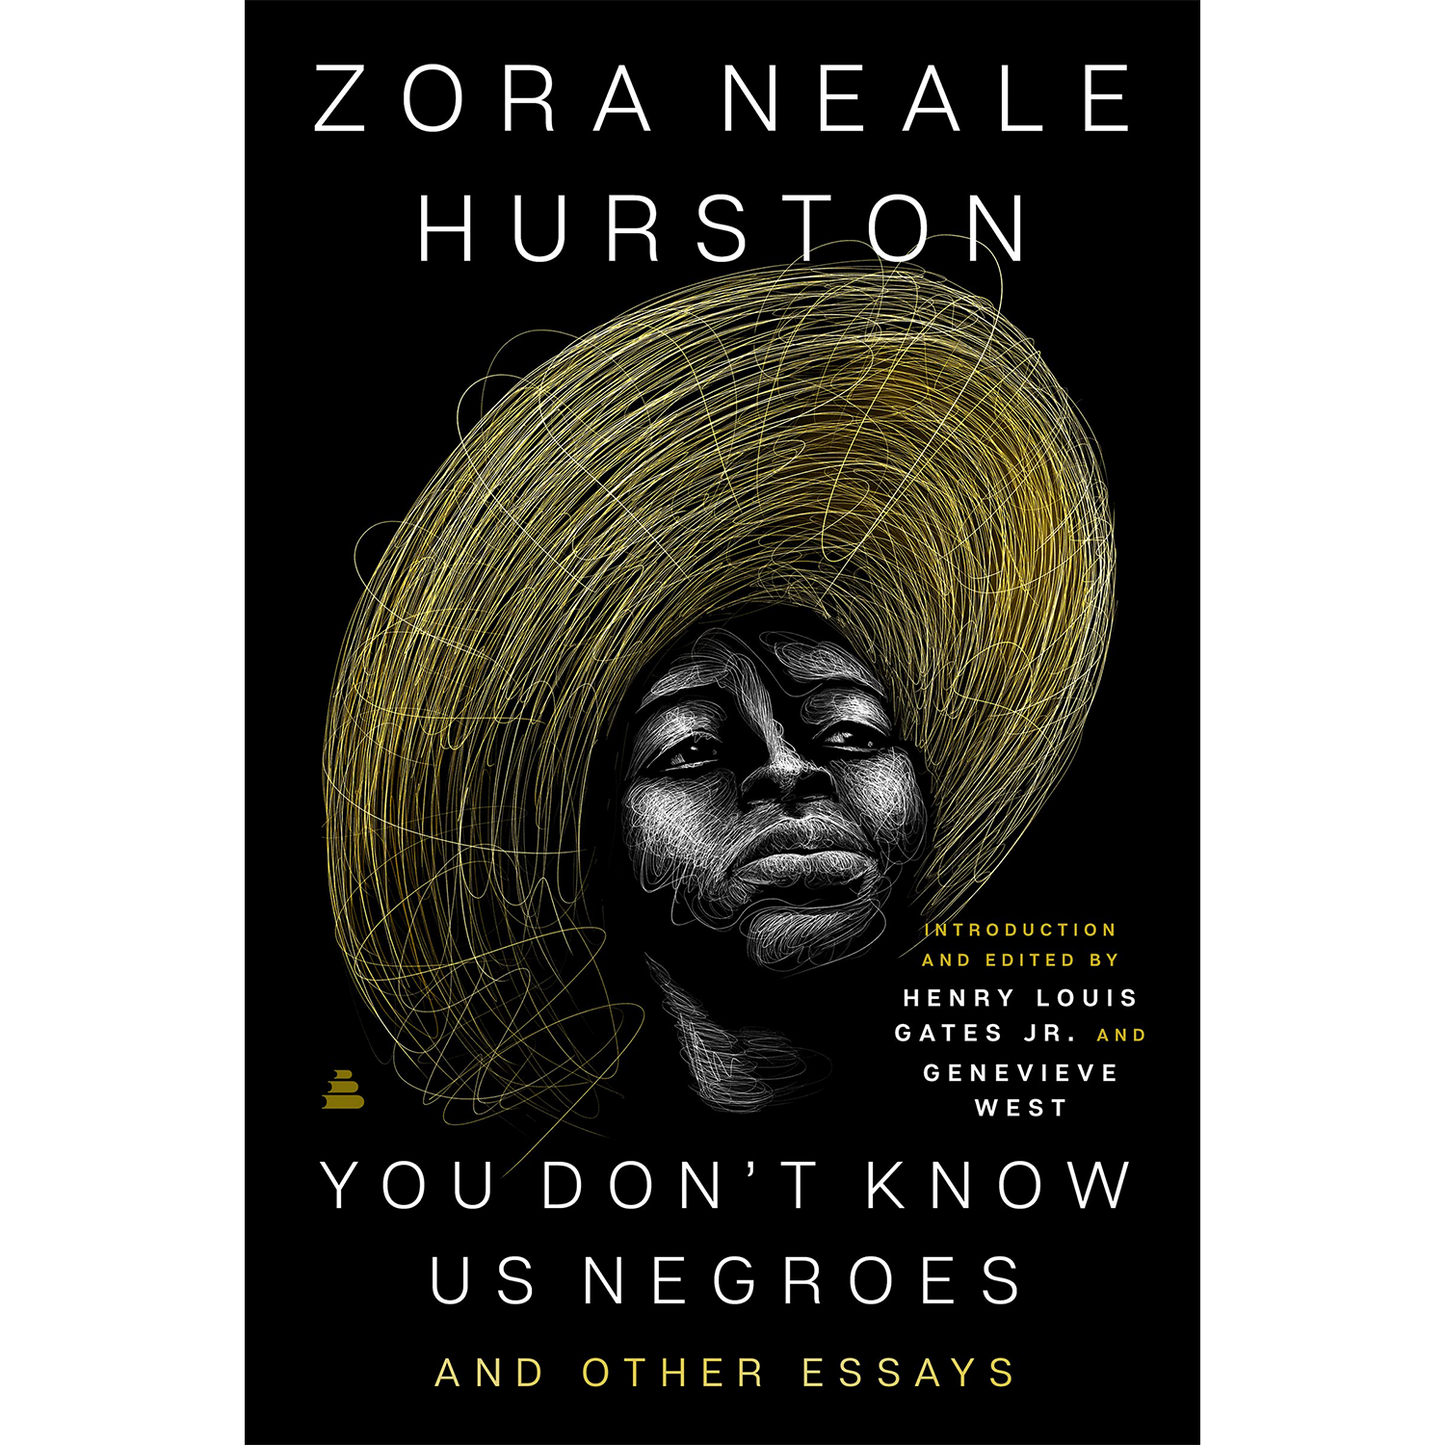 You Don’t Know Us Negroes and Other Essays